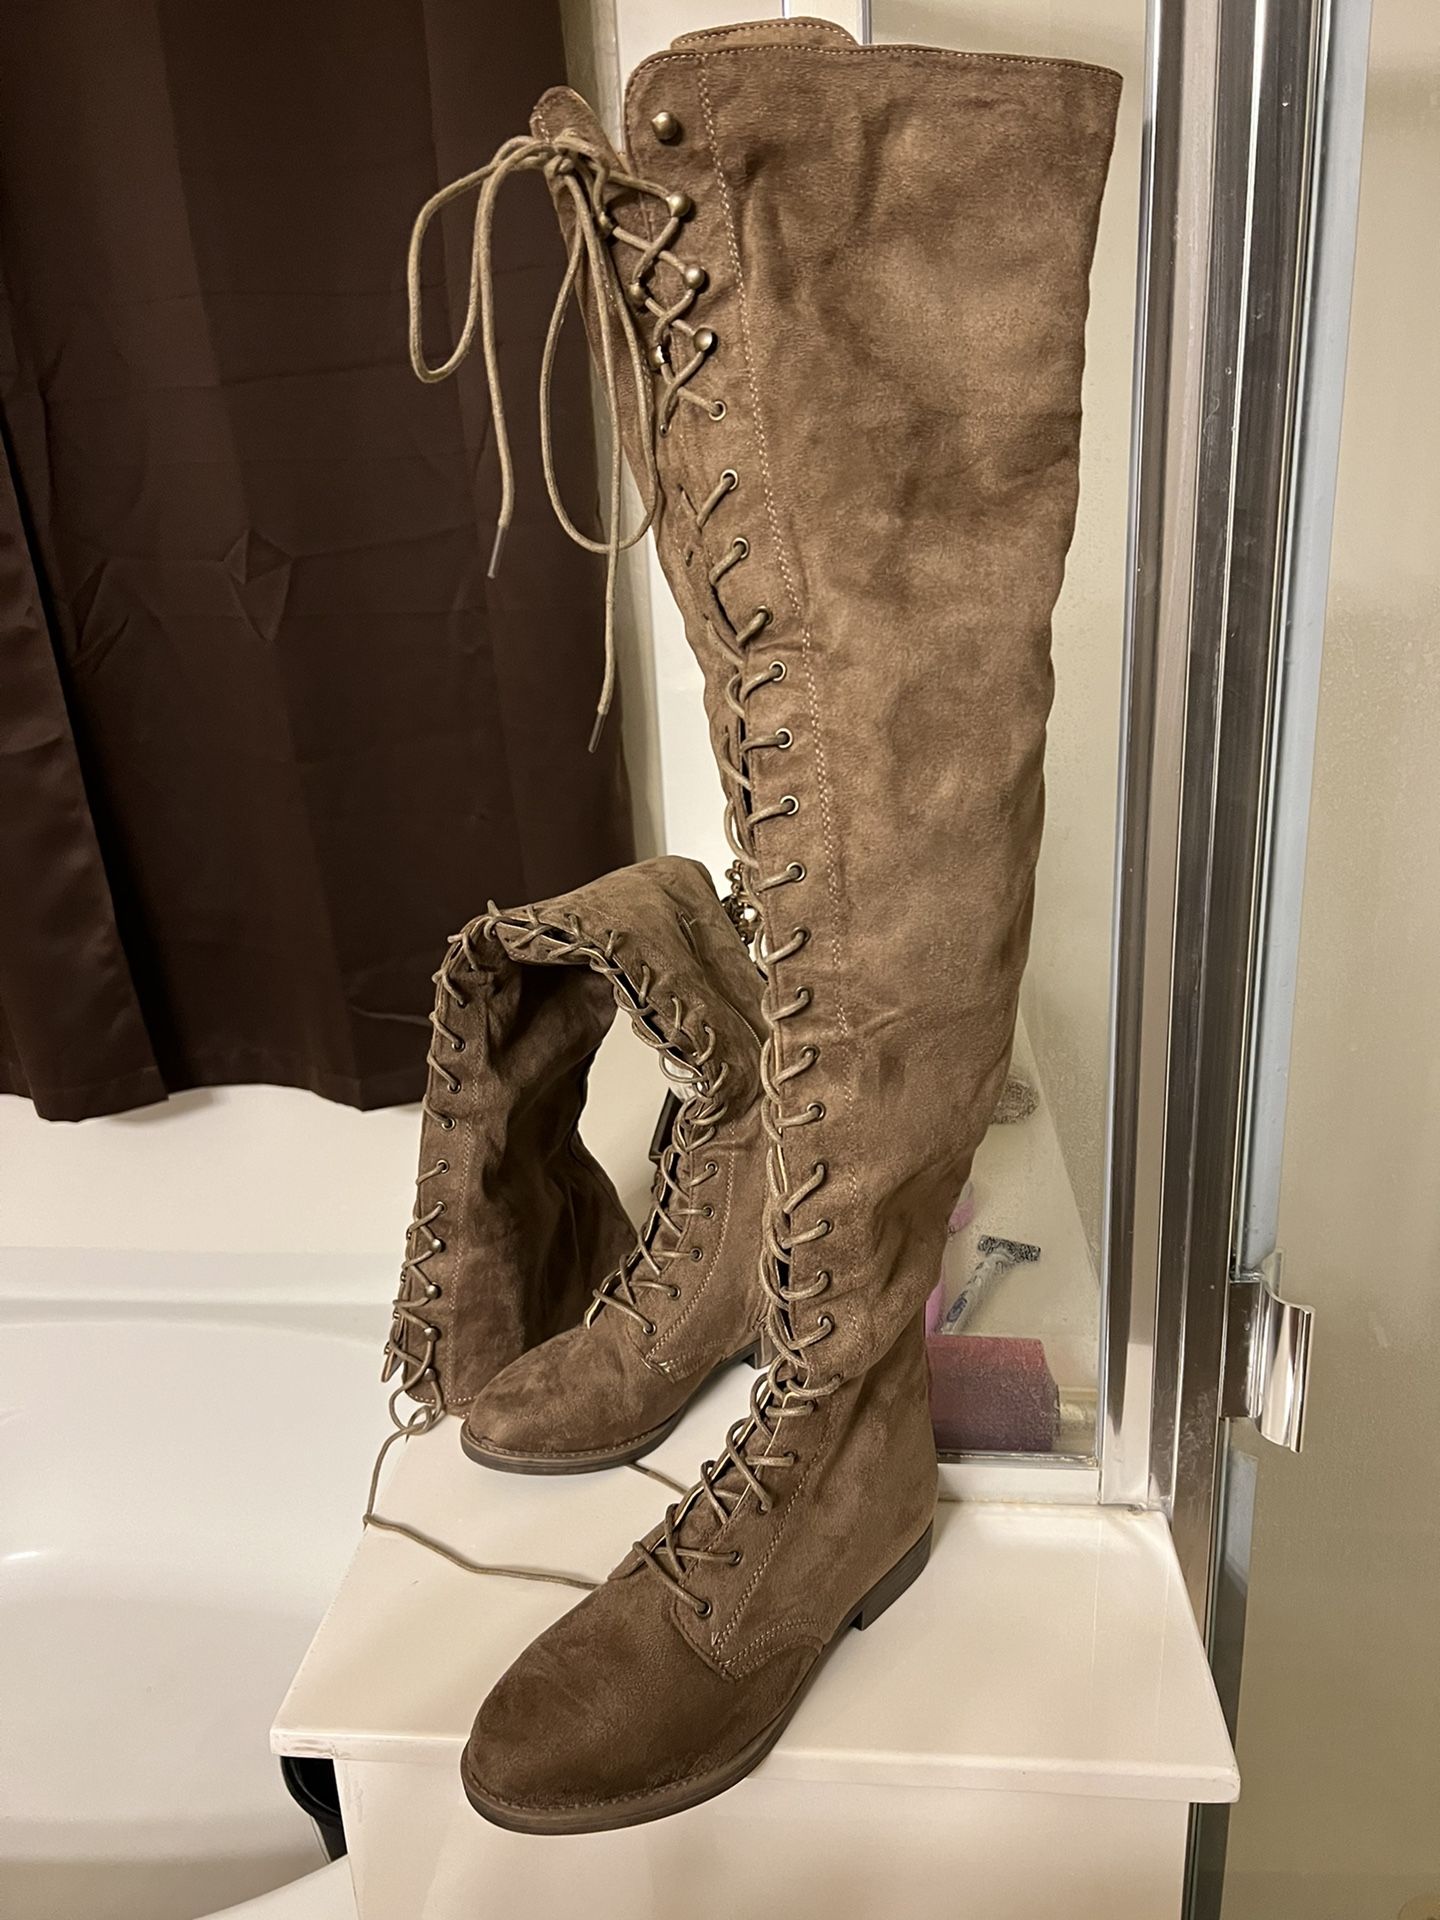 Thigh high boots size 8 $25 Firm PUO 